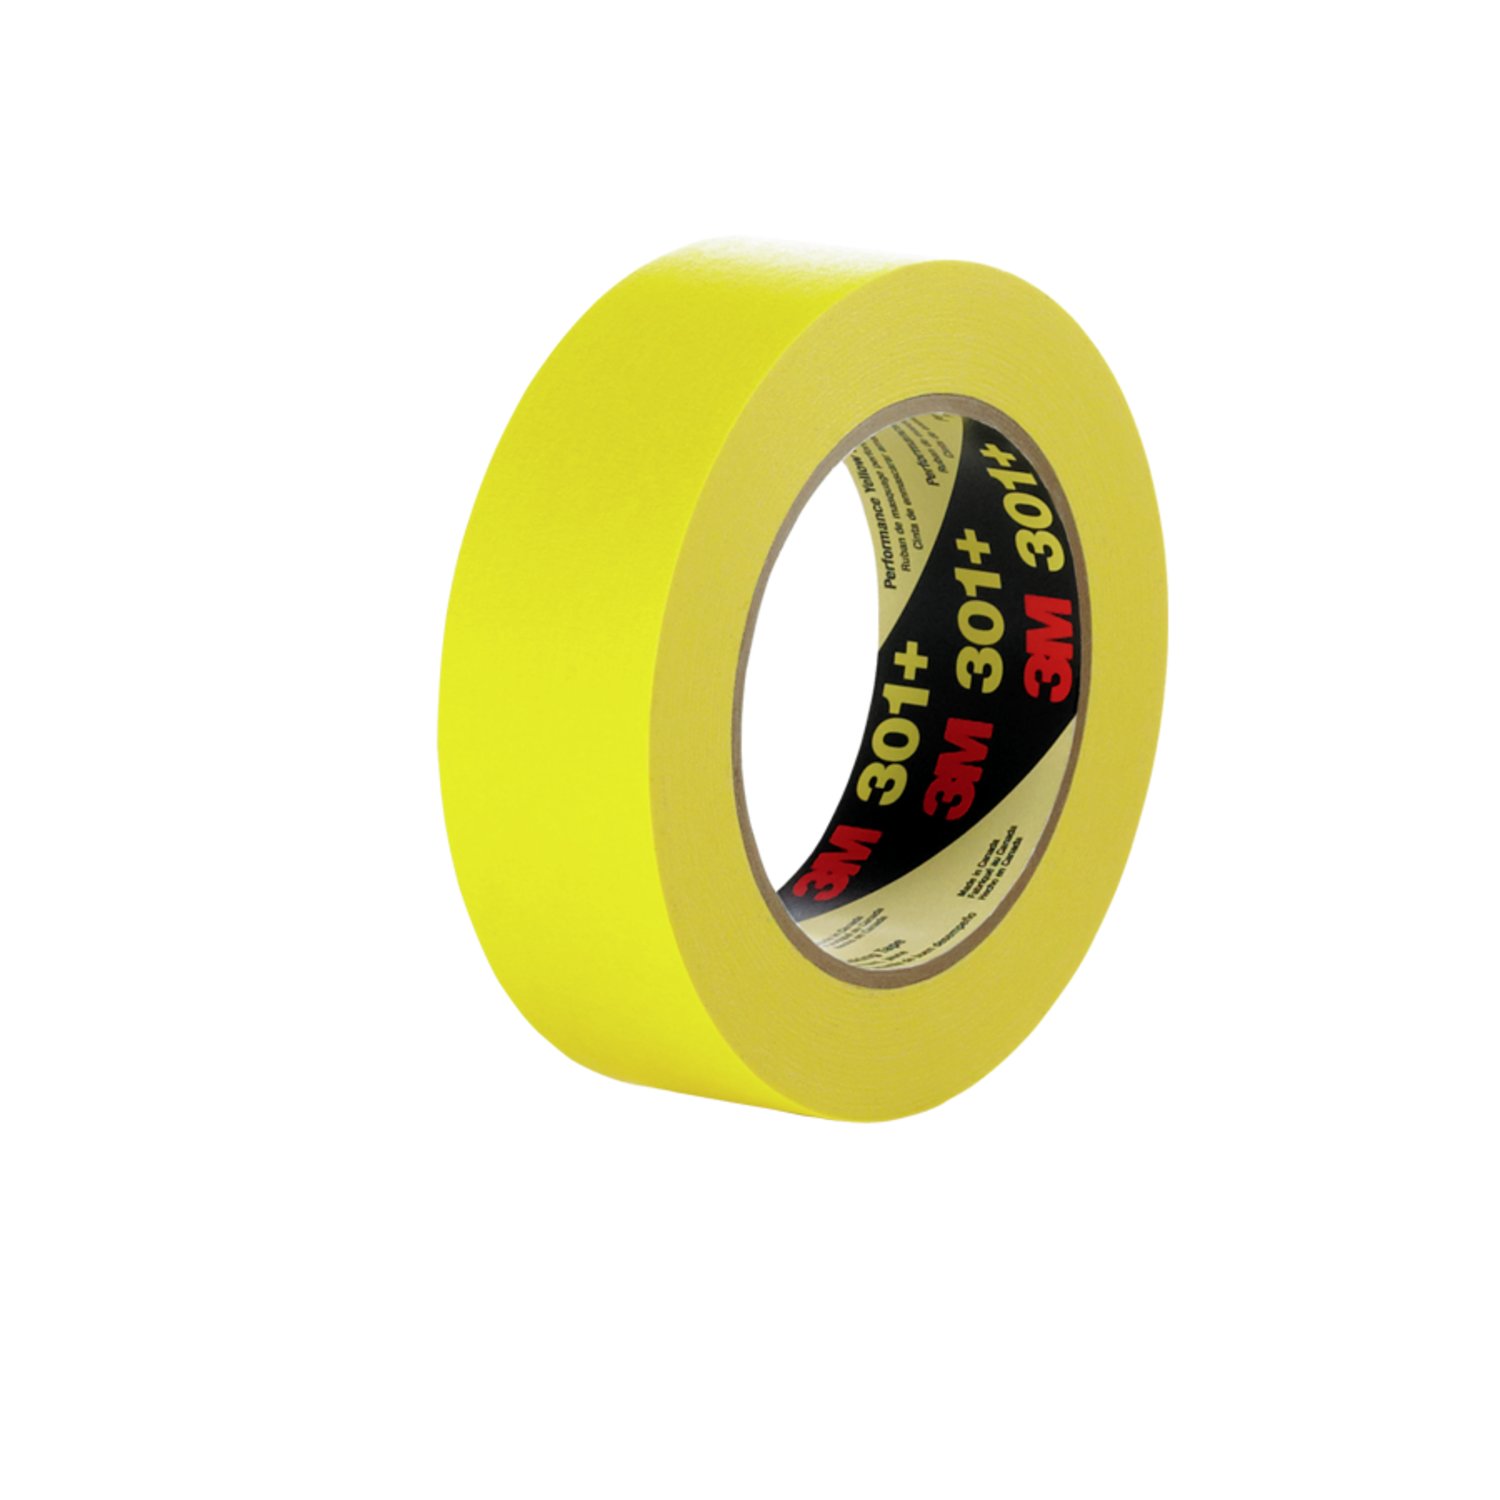 7000124888 - 3M Performance Yellow Masking Tape 301+, 18 mm x 55 m, 6.3 mil, 48
Roll/Case